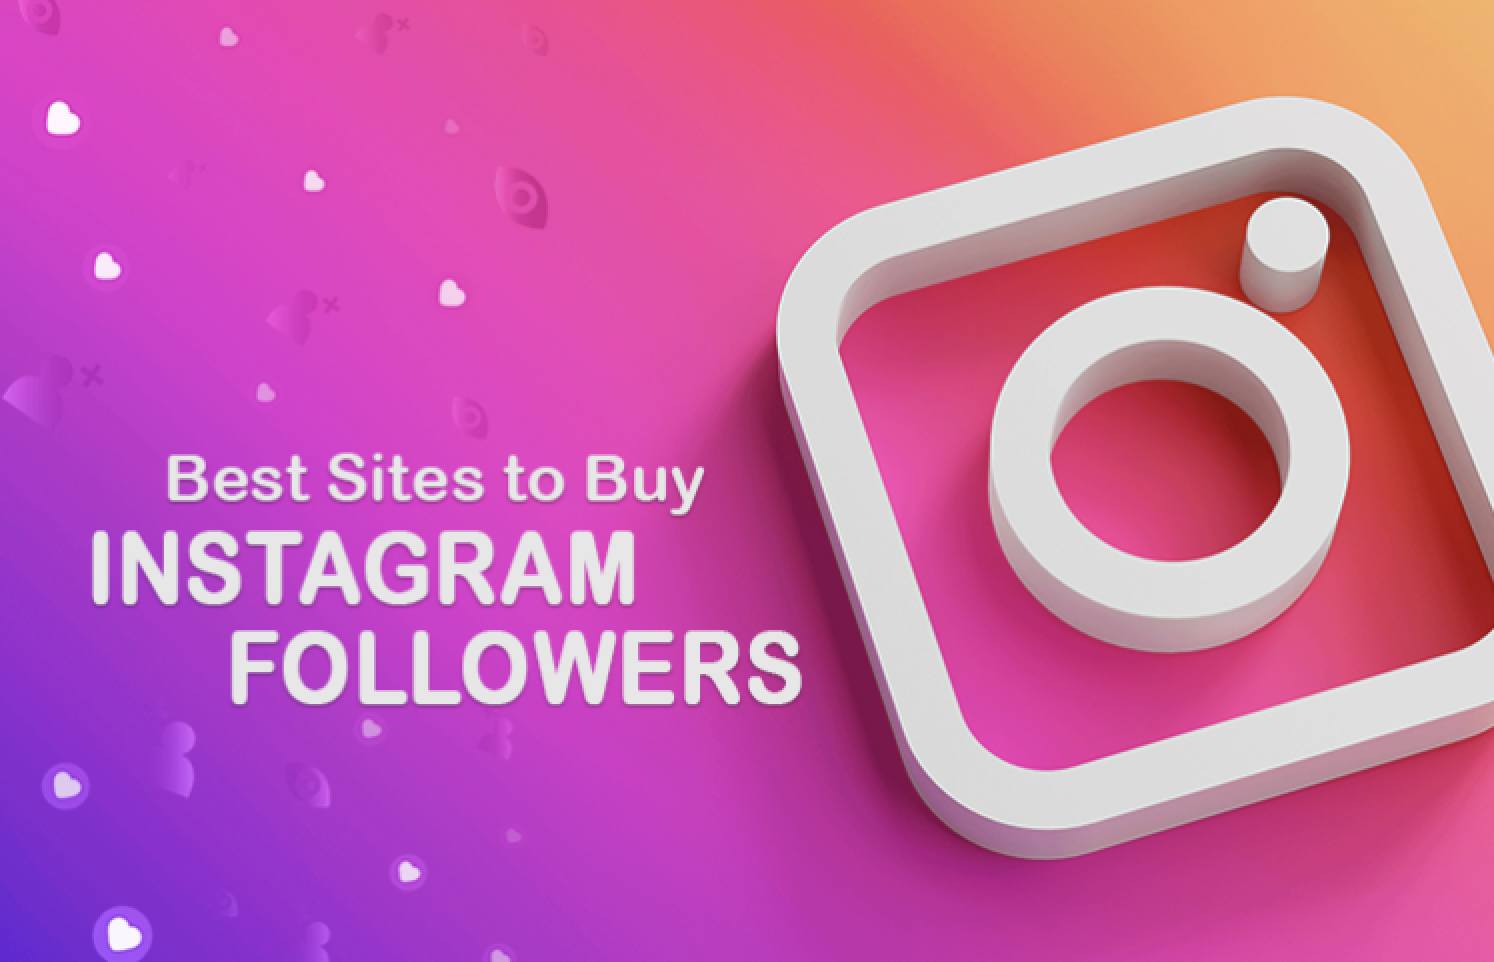 The Art and Science of Building Followers: Buy Instagram Followers Strategically